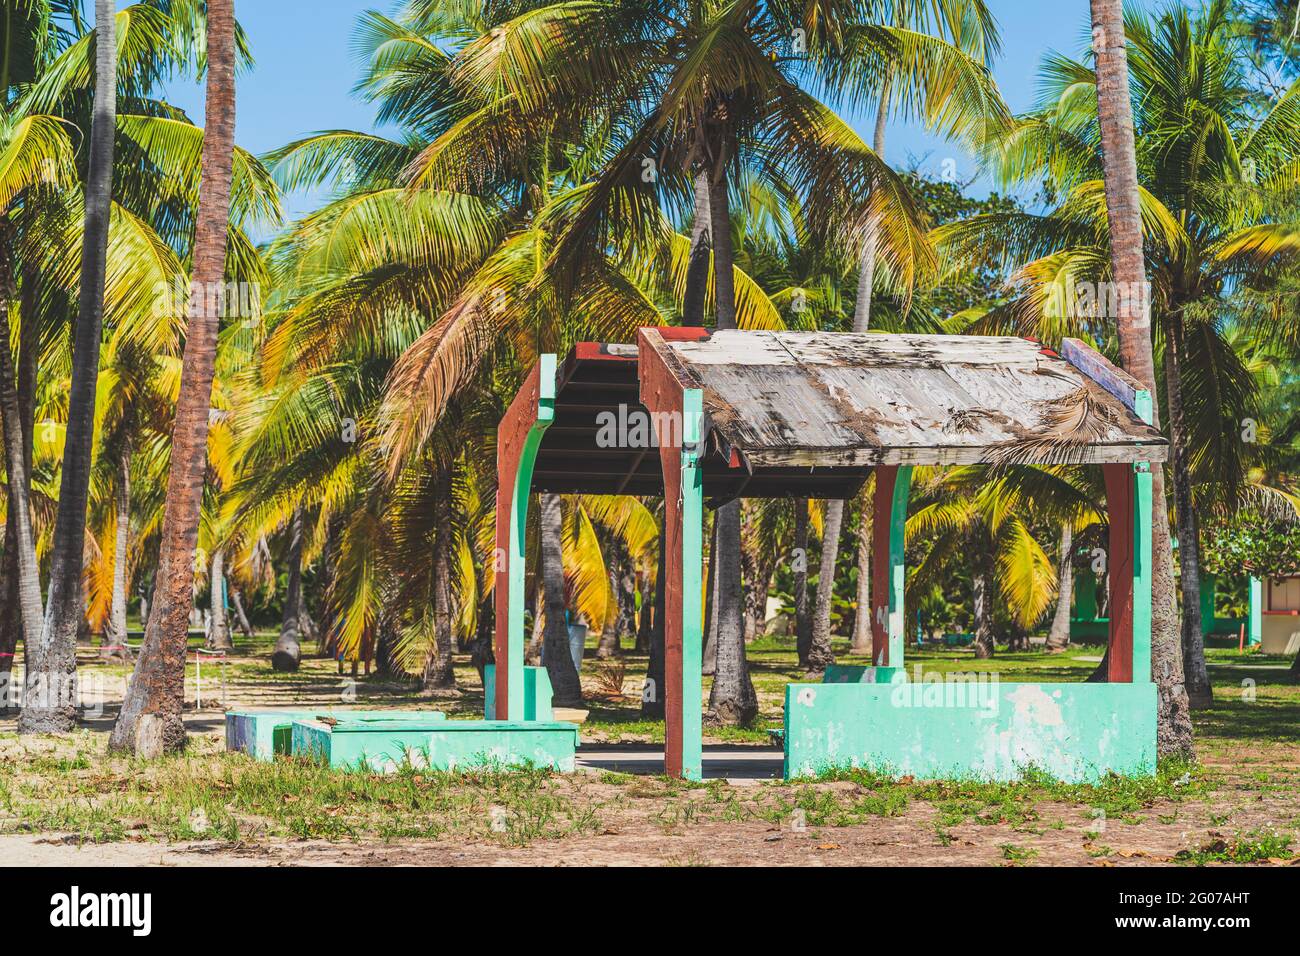 Depilated building damaged from hurricane on tropical beach park Stock Photo